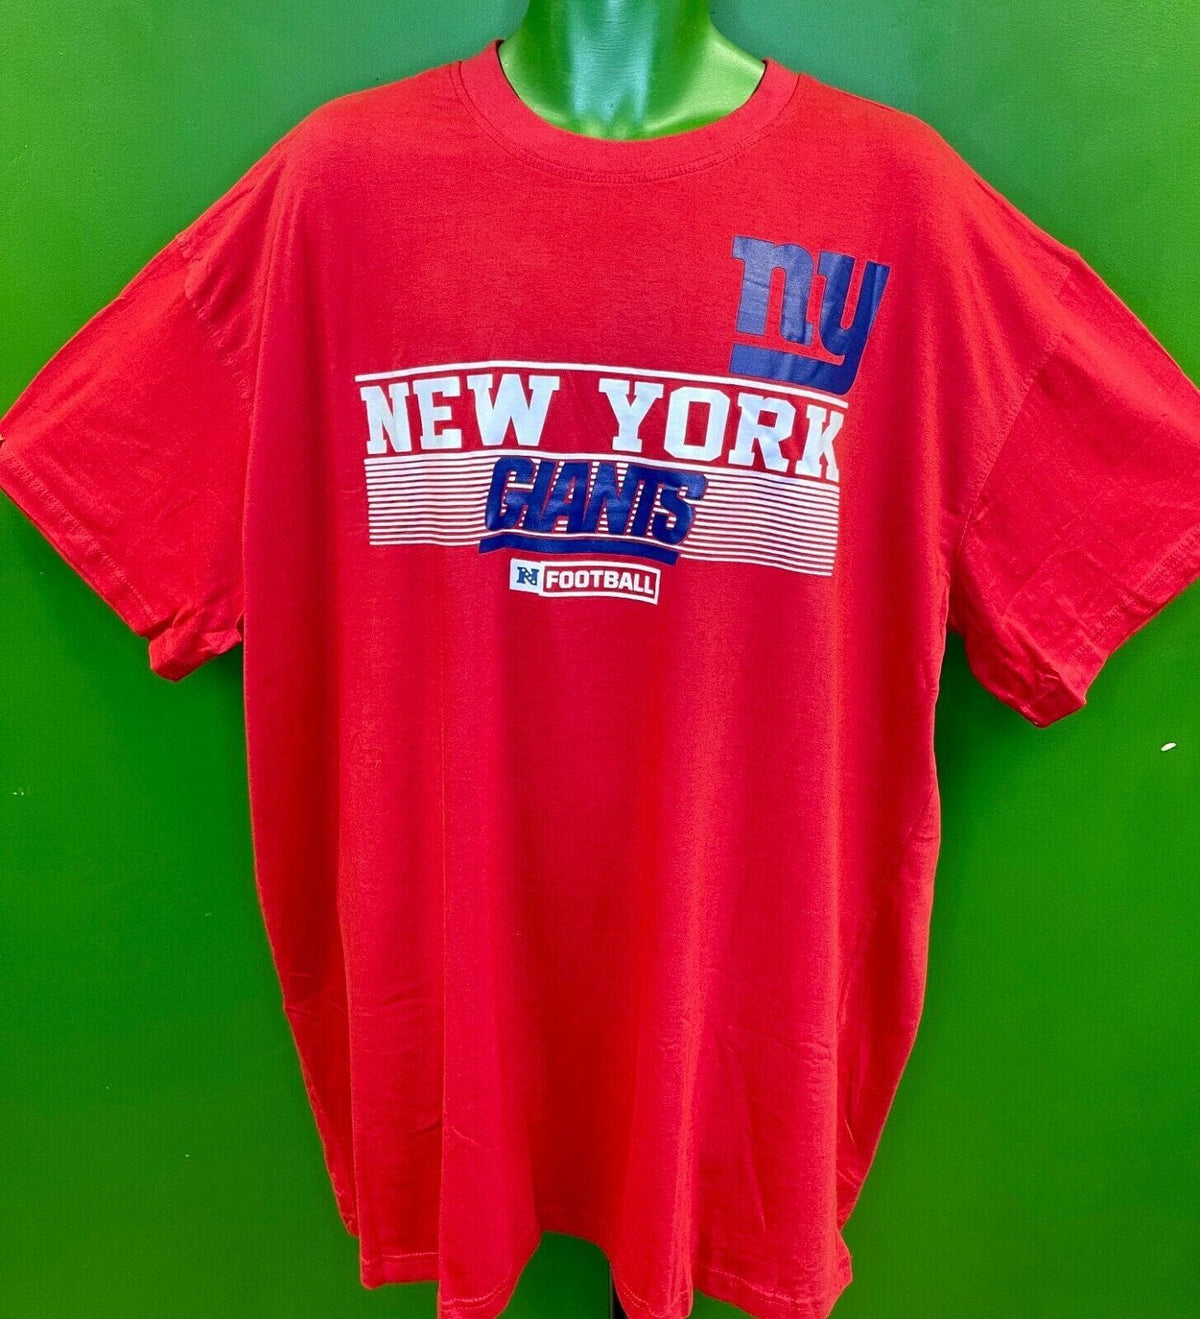 NFL New York Giants Majestic Red Cotton T-Shirt Men's 3X-Large NWT